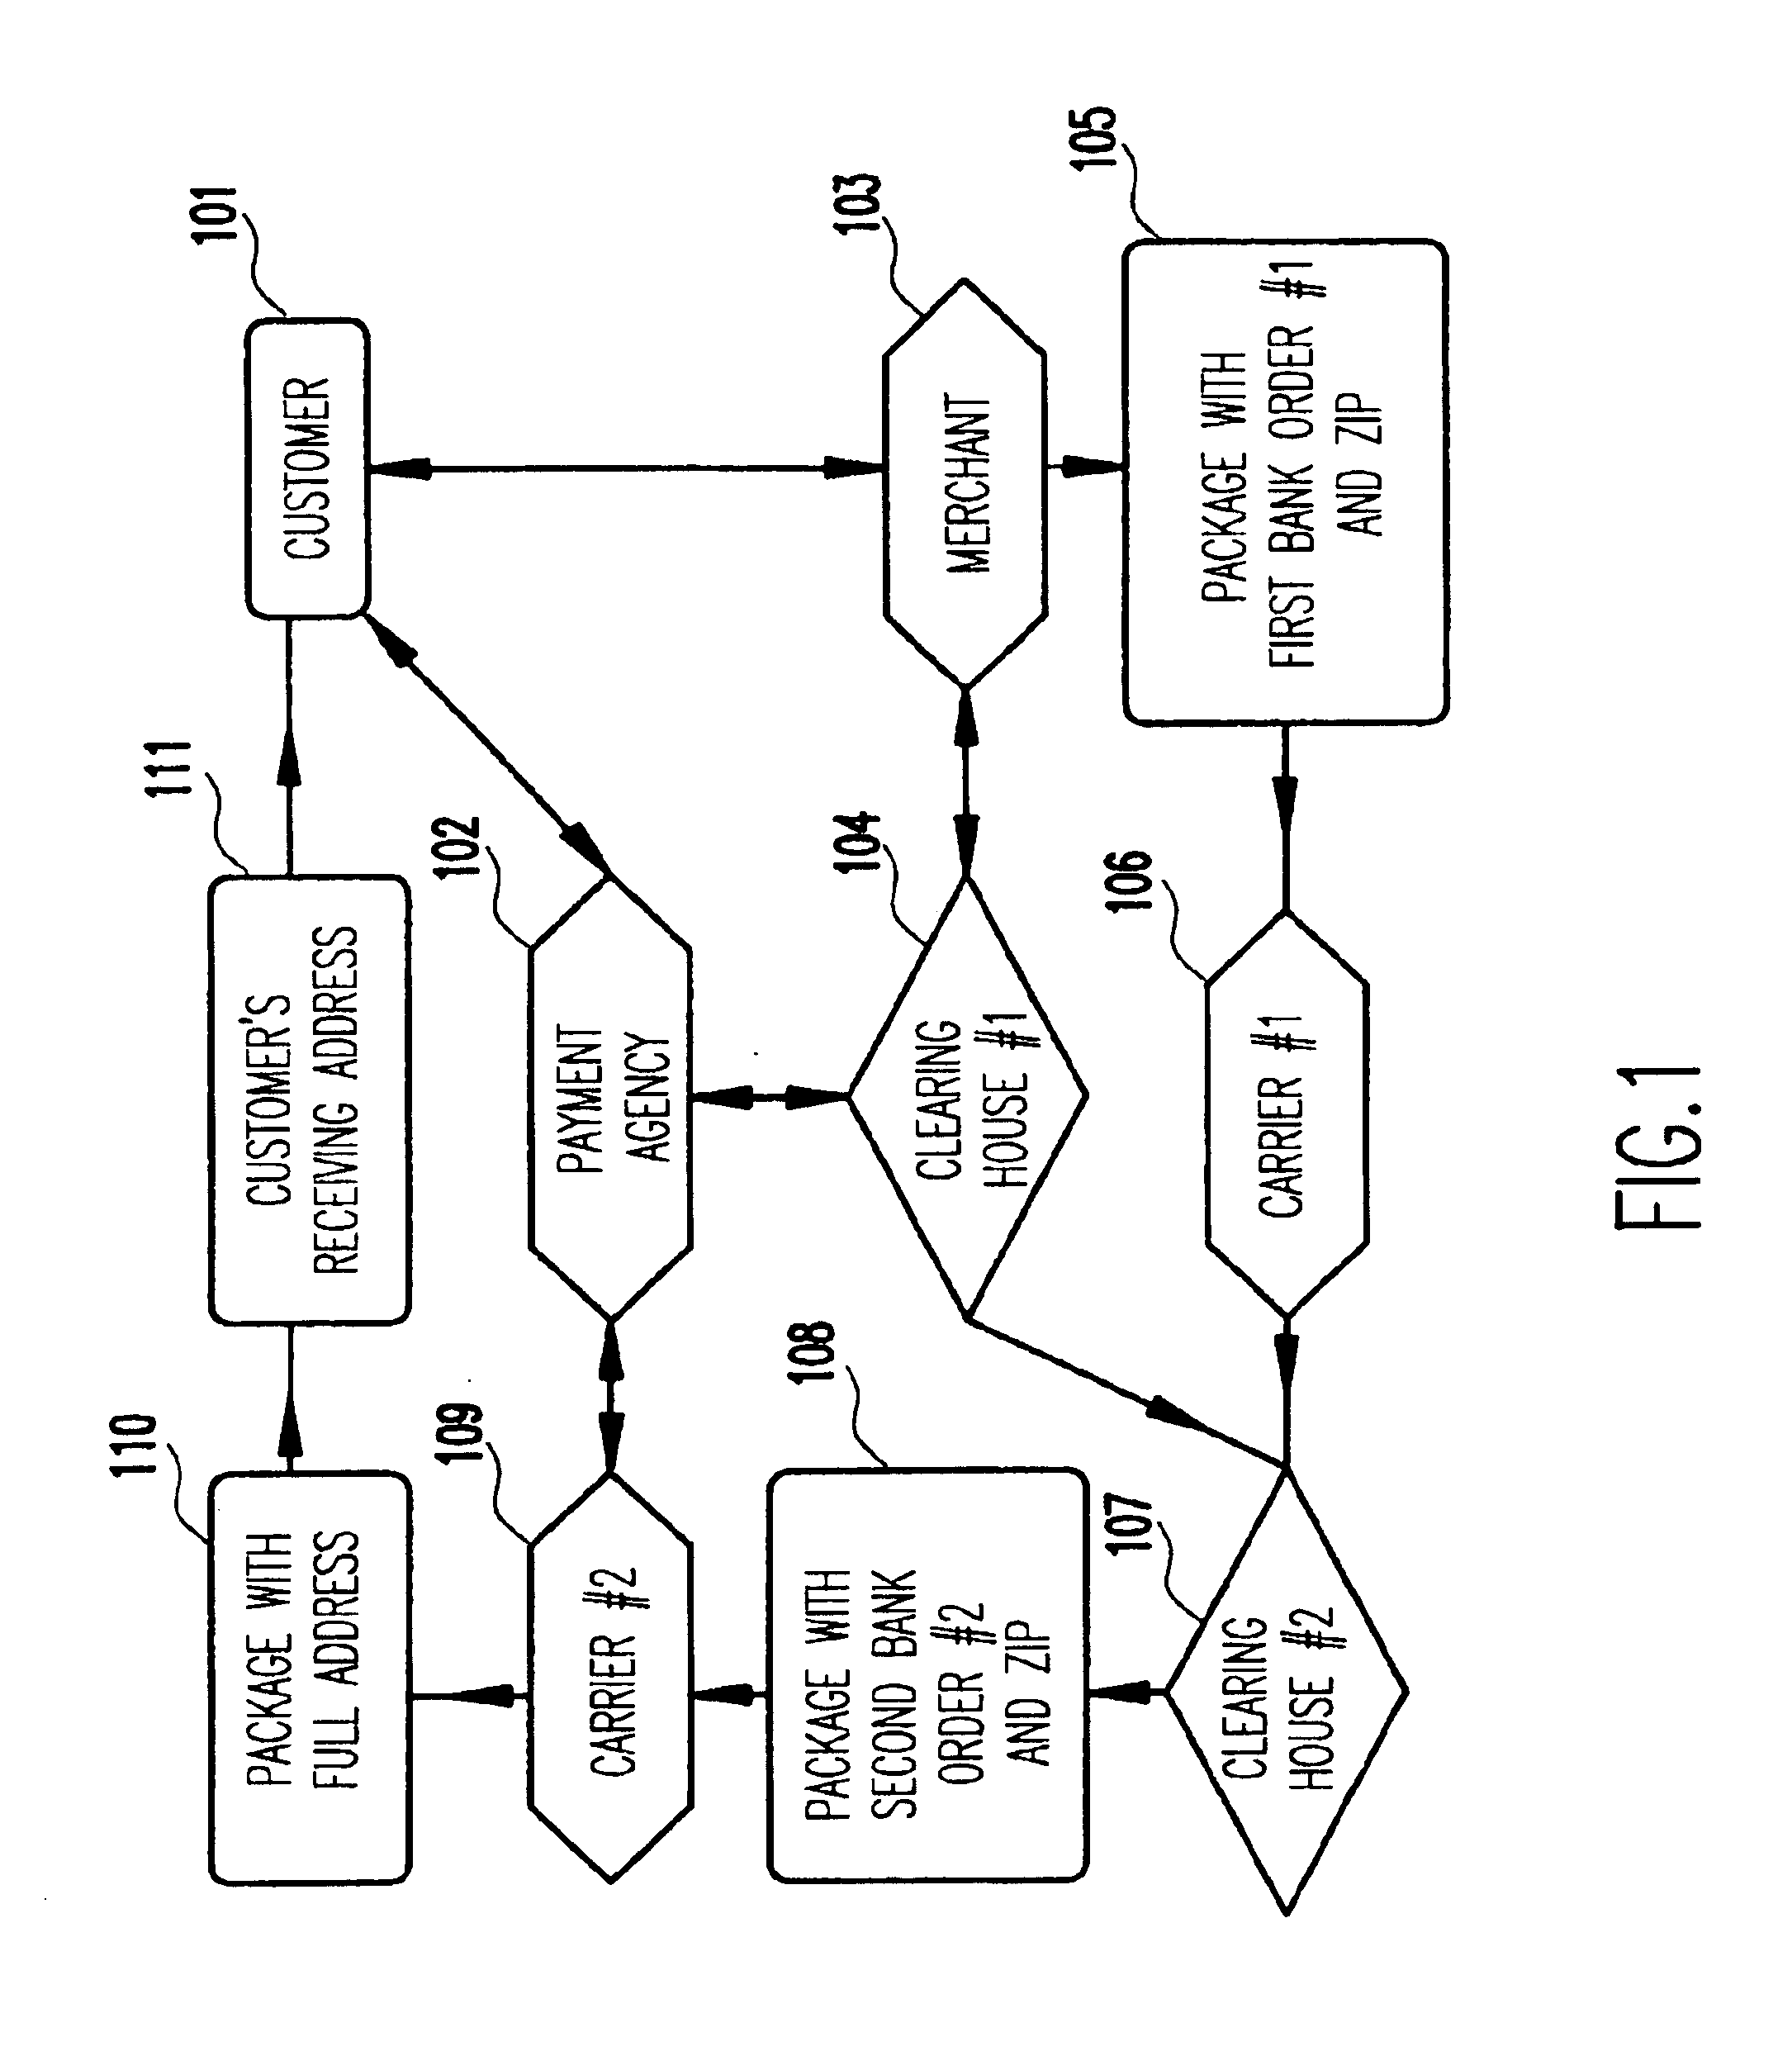 Method and apparatus for remote commerce with customer anonymity